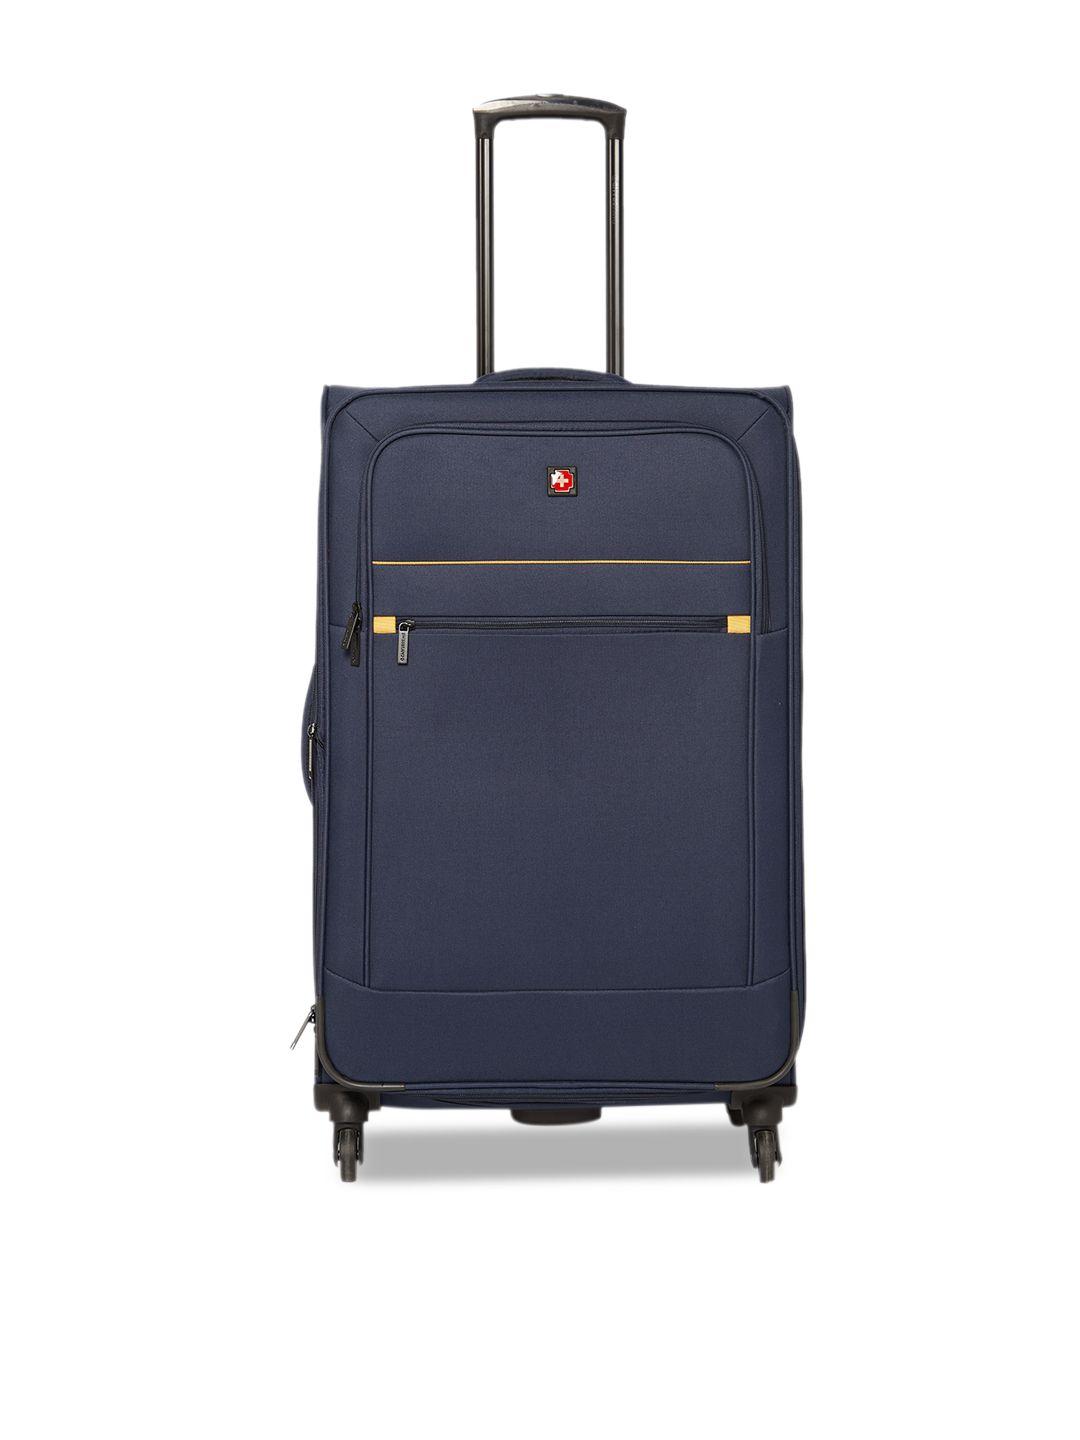 swiss brand navy blue solid barcelona 360-degree rotation soft-sided large trolley suitcase